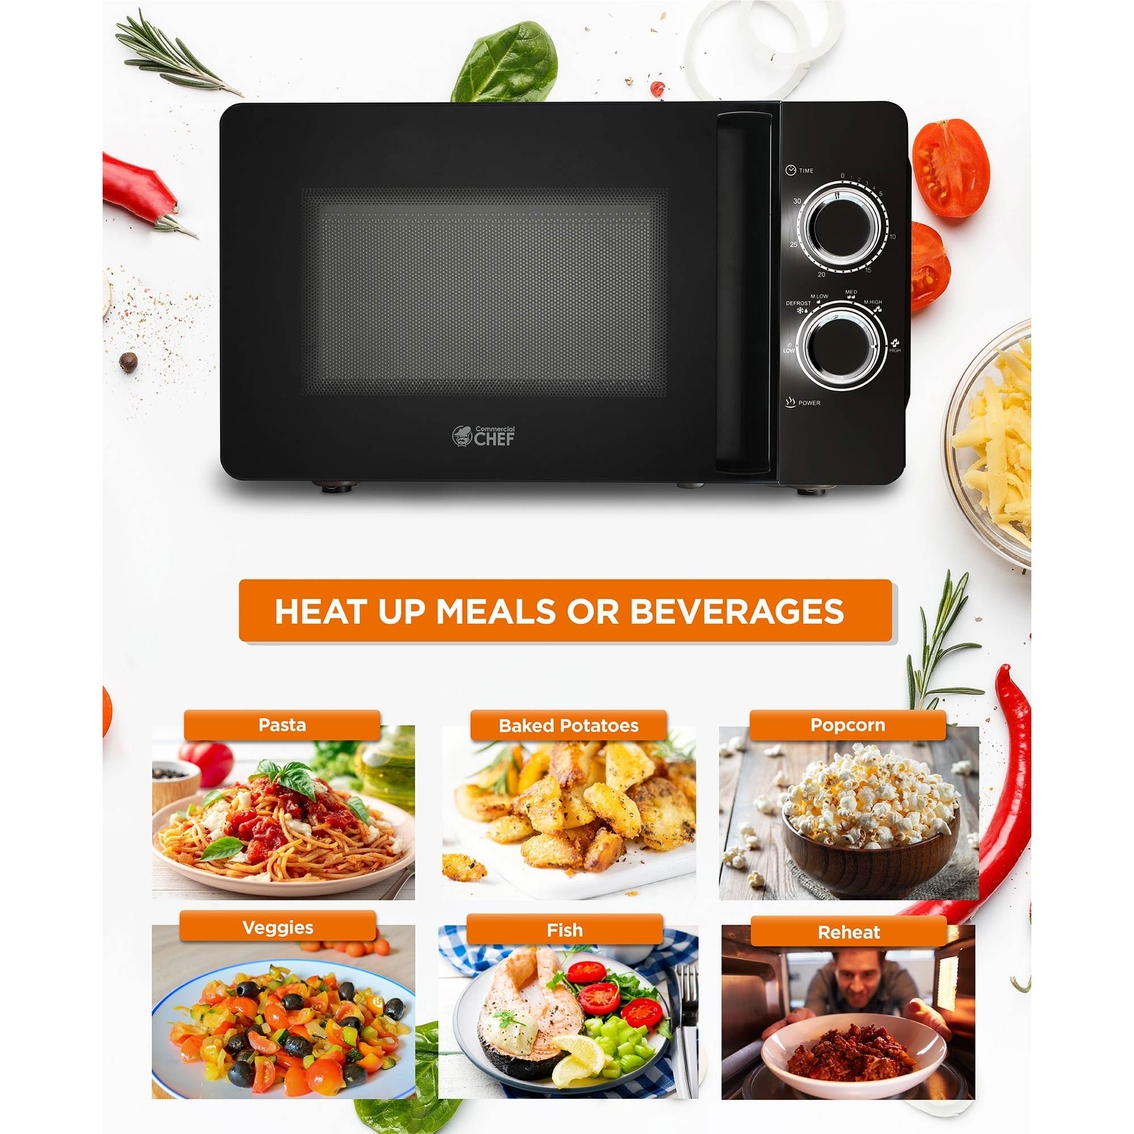 Commercial Chef 0.7 Cu. Ft. Countertop Microwave Oven - Image 2 of 7